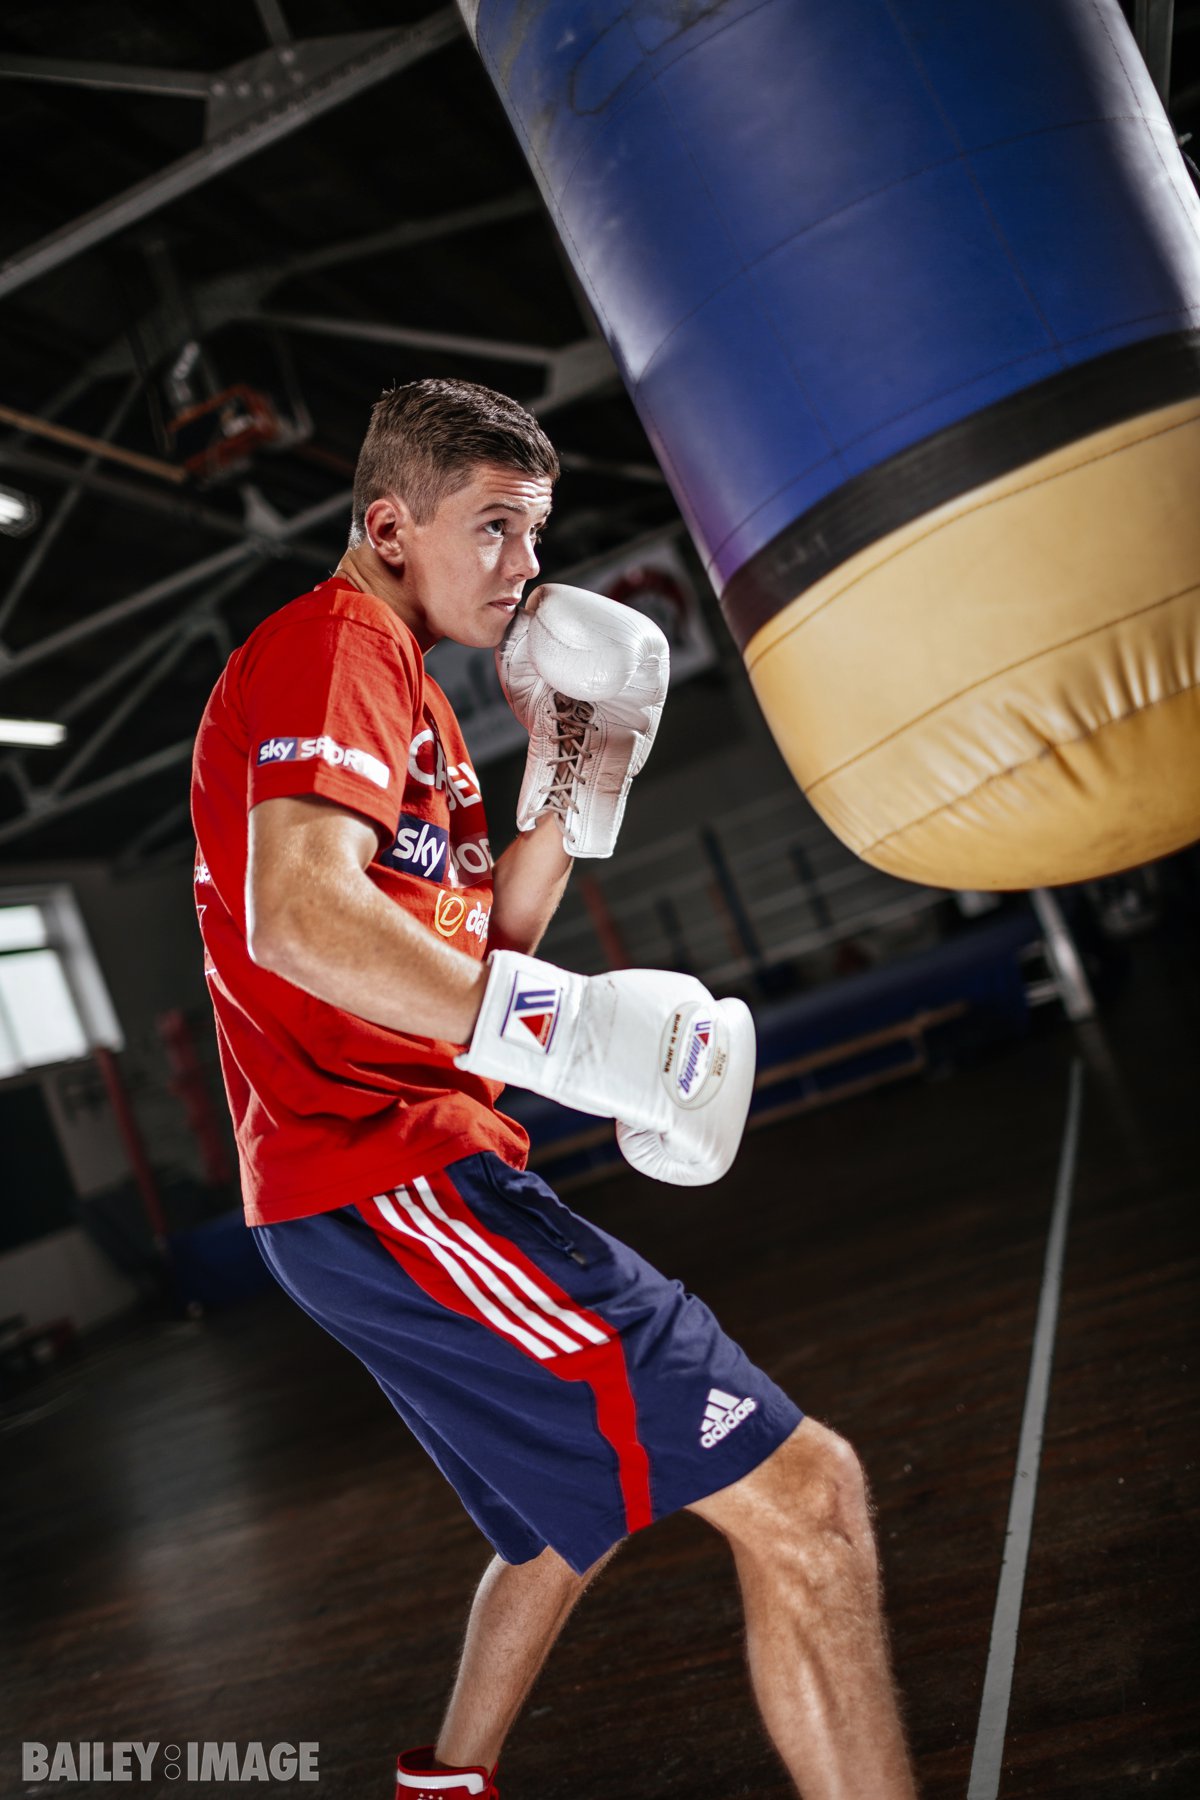 Luke Campbell looking to put on a show in Hull - British ... - megan ...